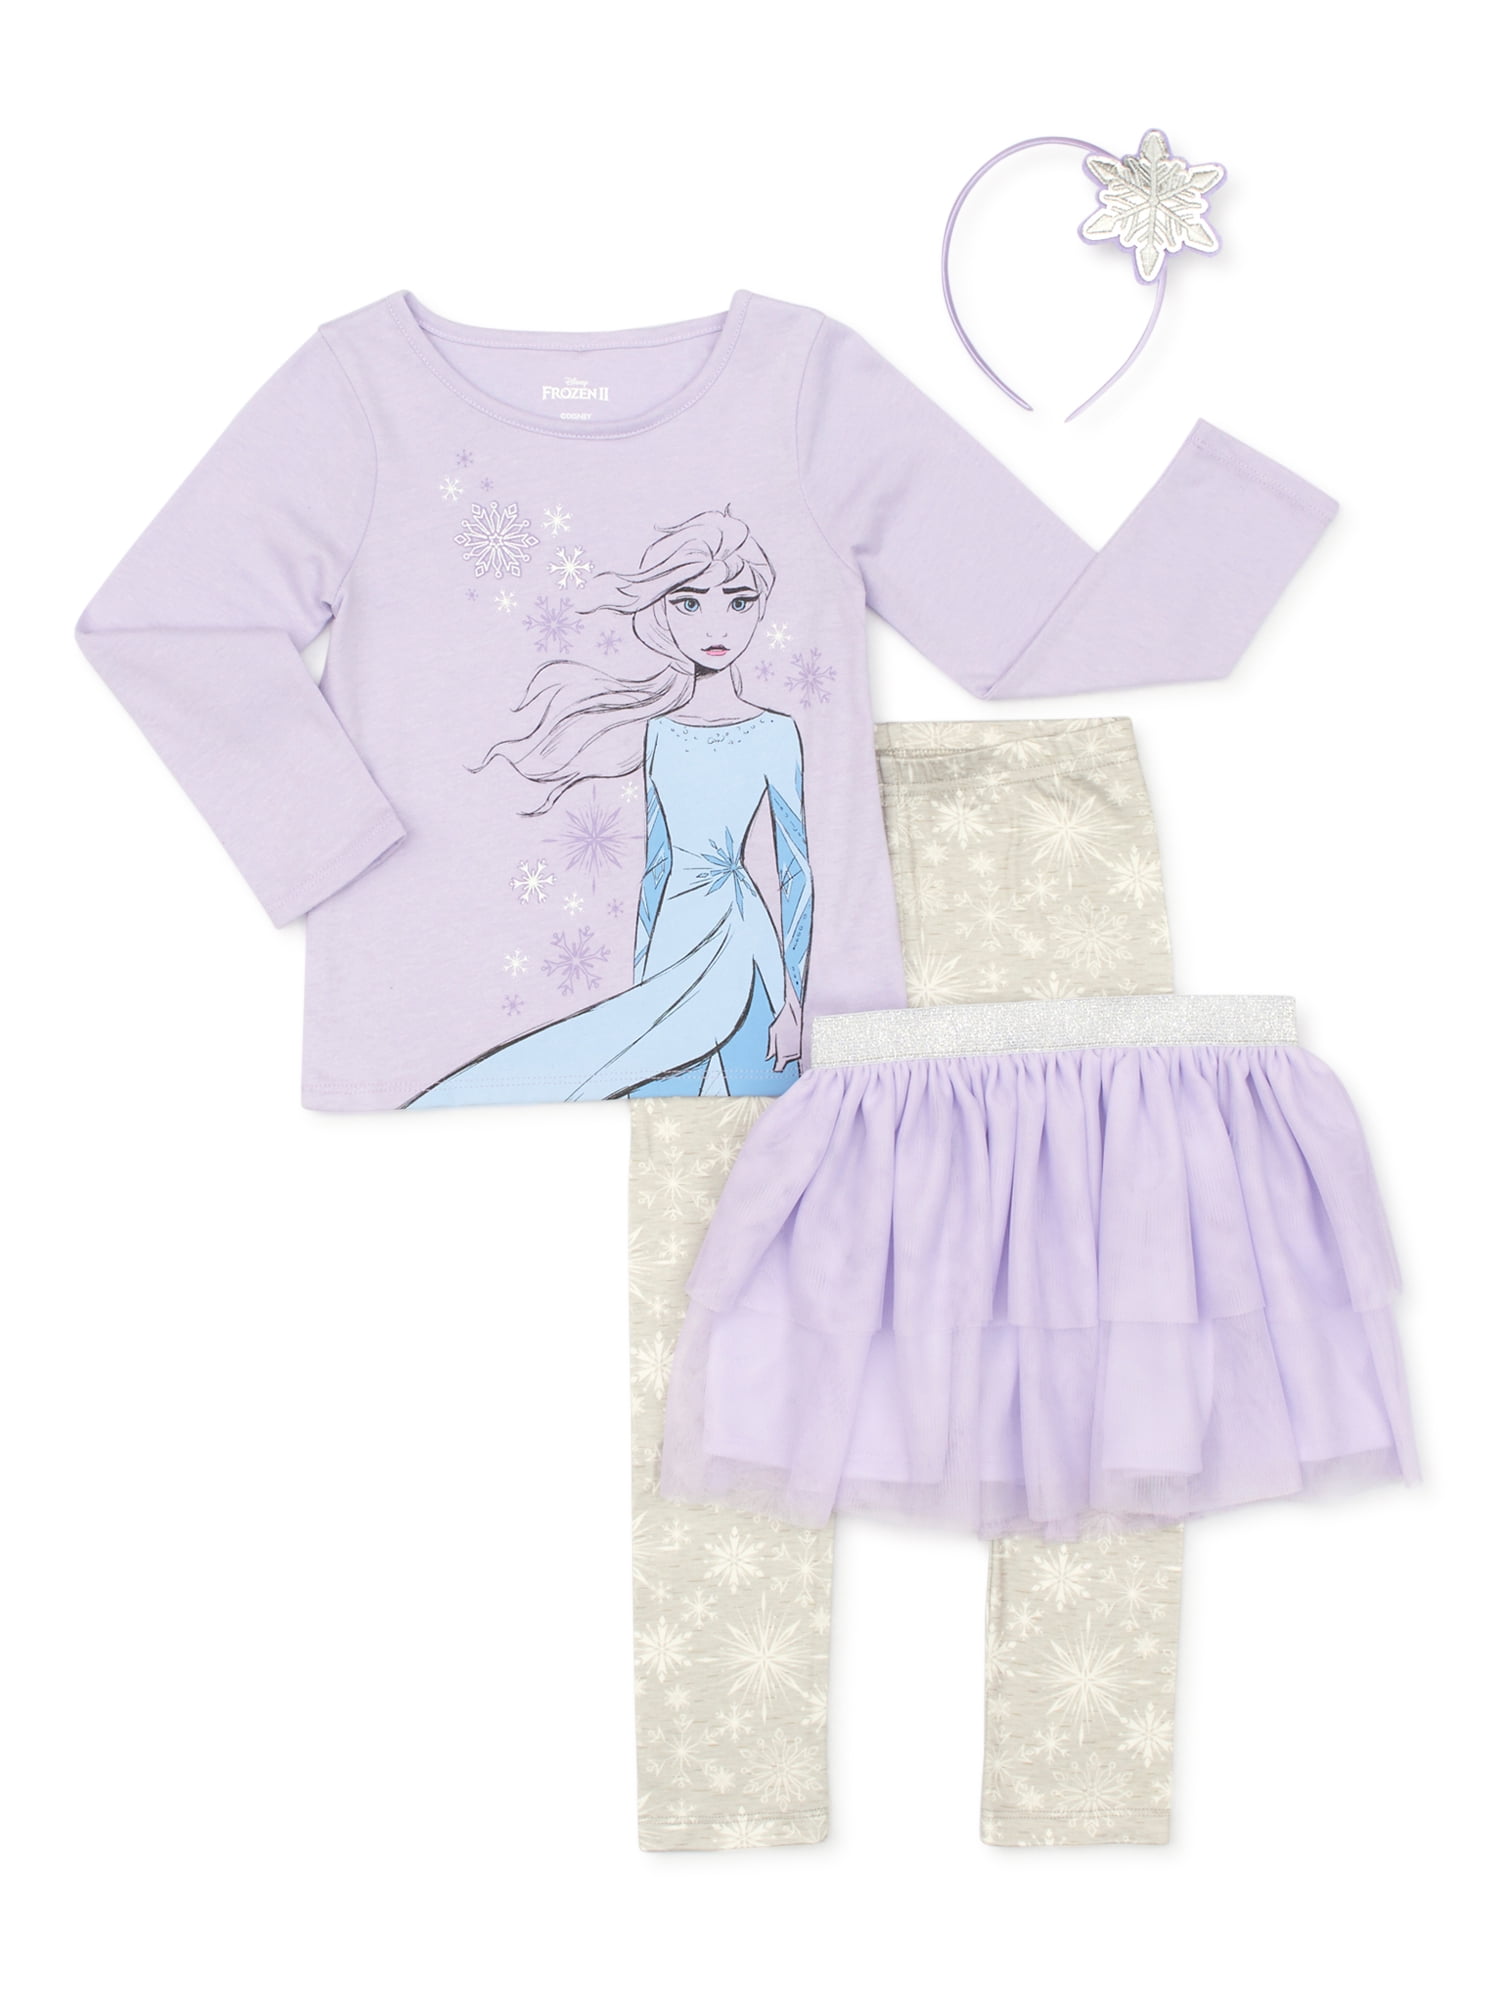 Party City Disney Frozen 2 Epilogue Elsa Halloween Costume for Kids, Small,  Includes Dress, Leggings, For Pretend Play : Amazon.in: Toys & Games